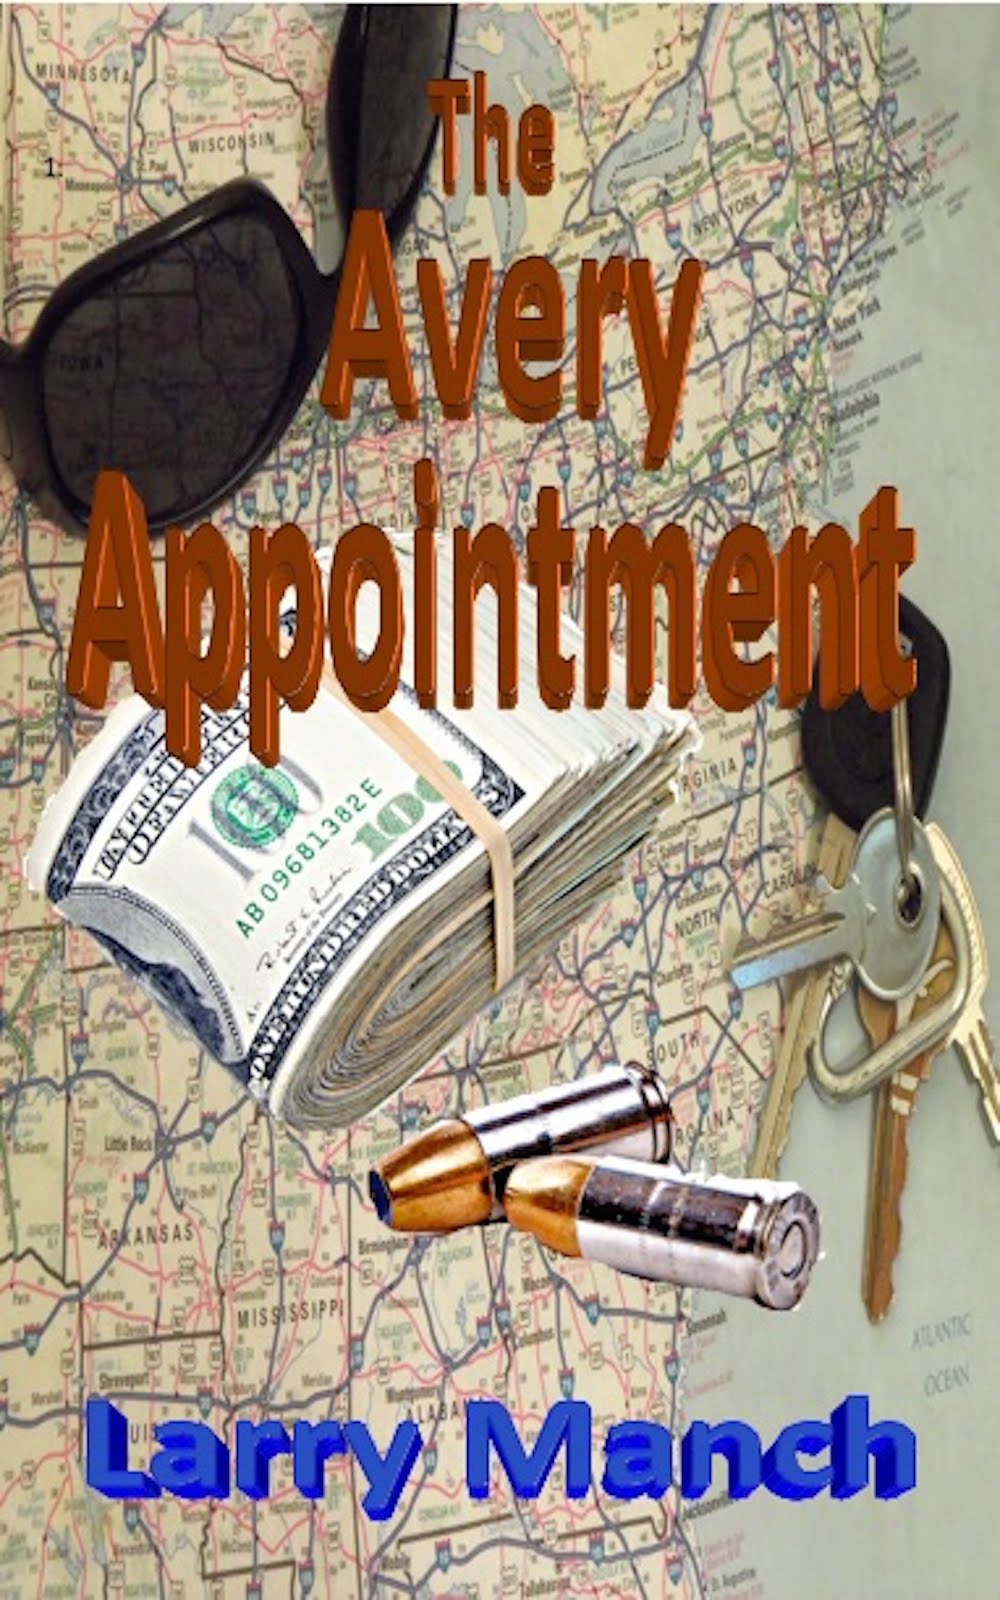 The Avery Appointment